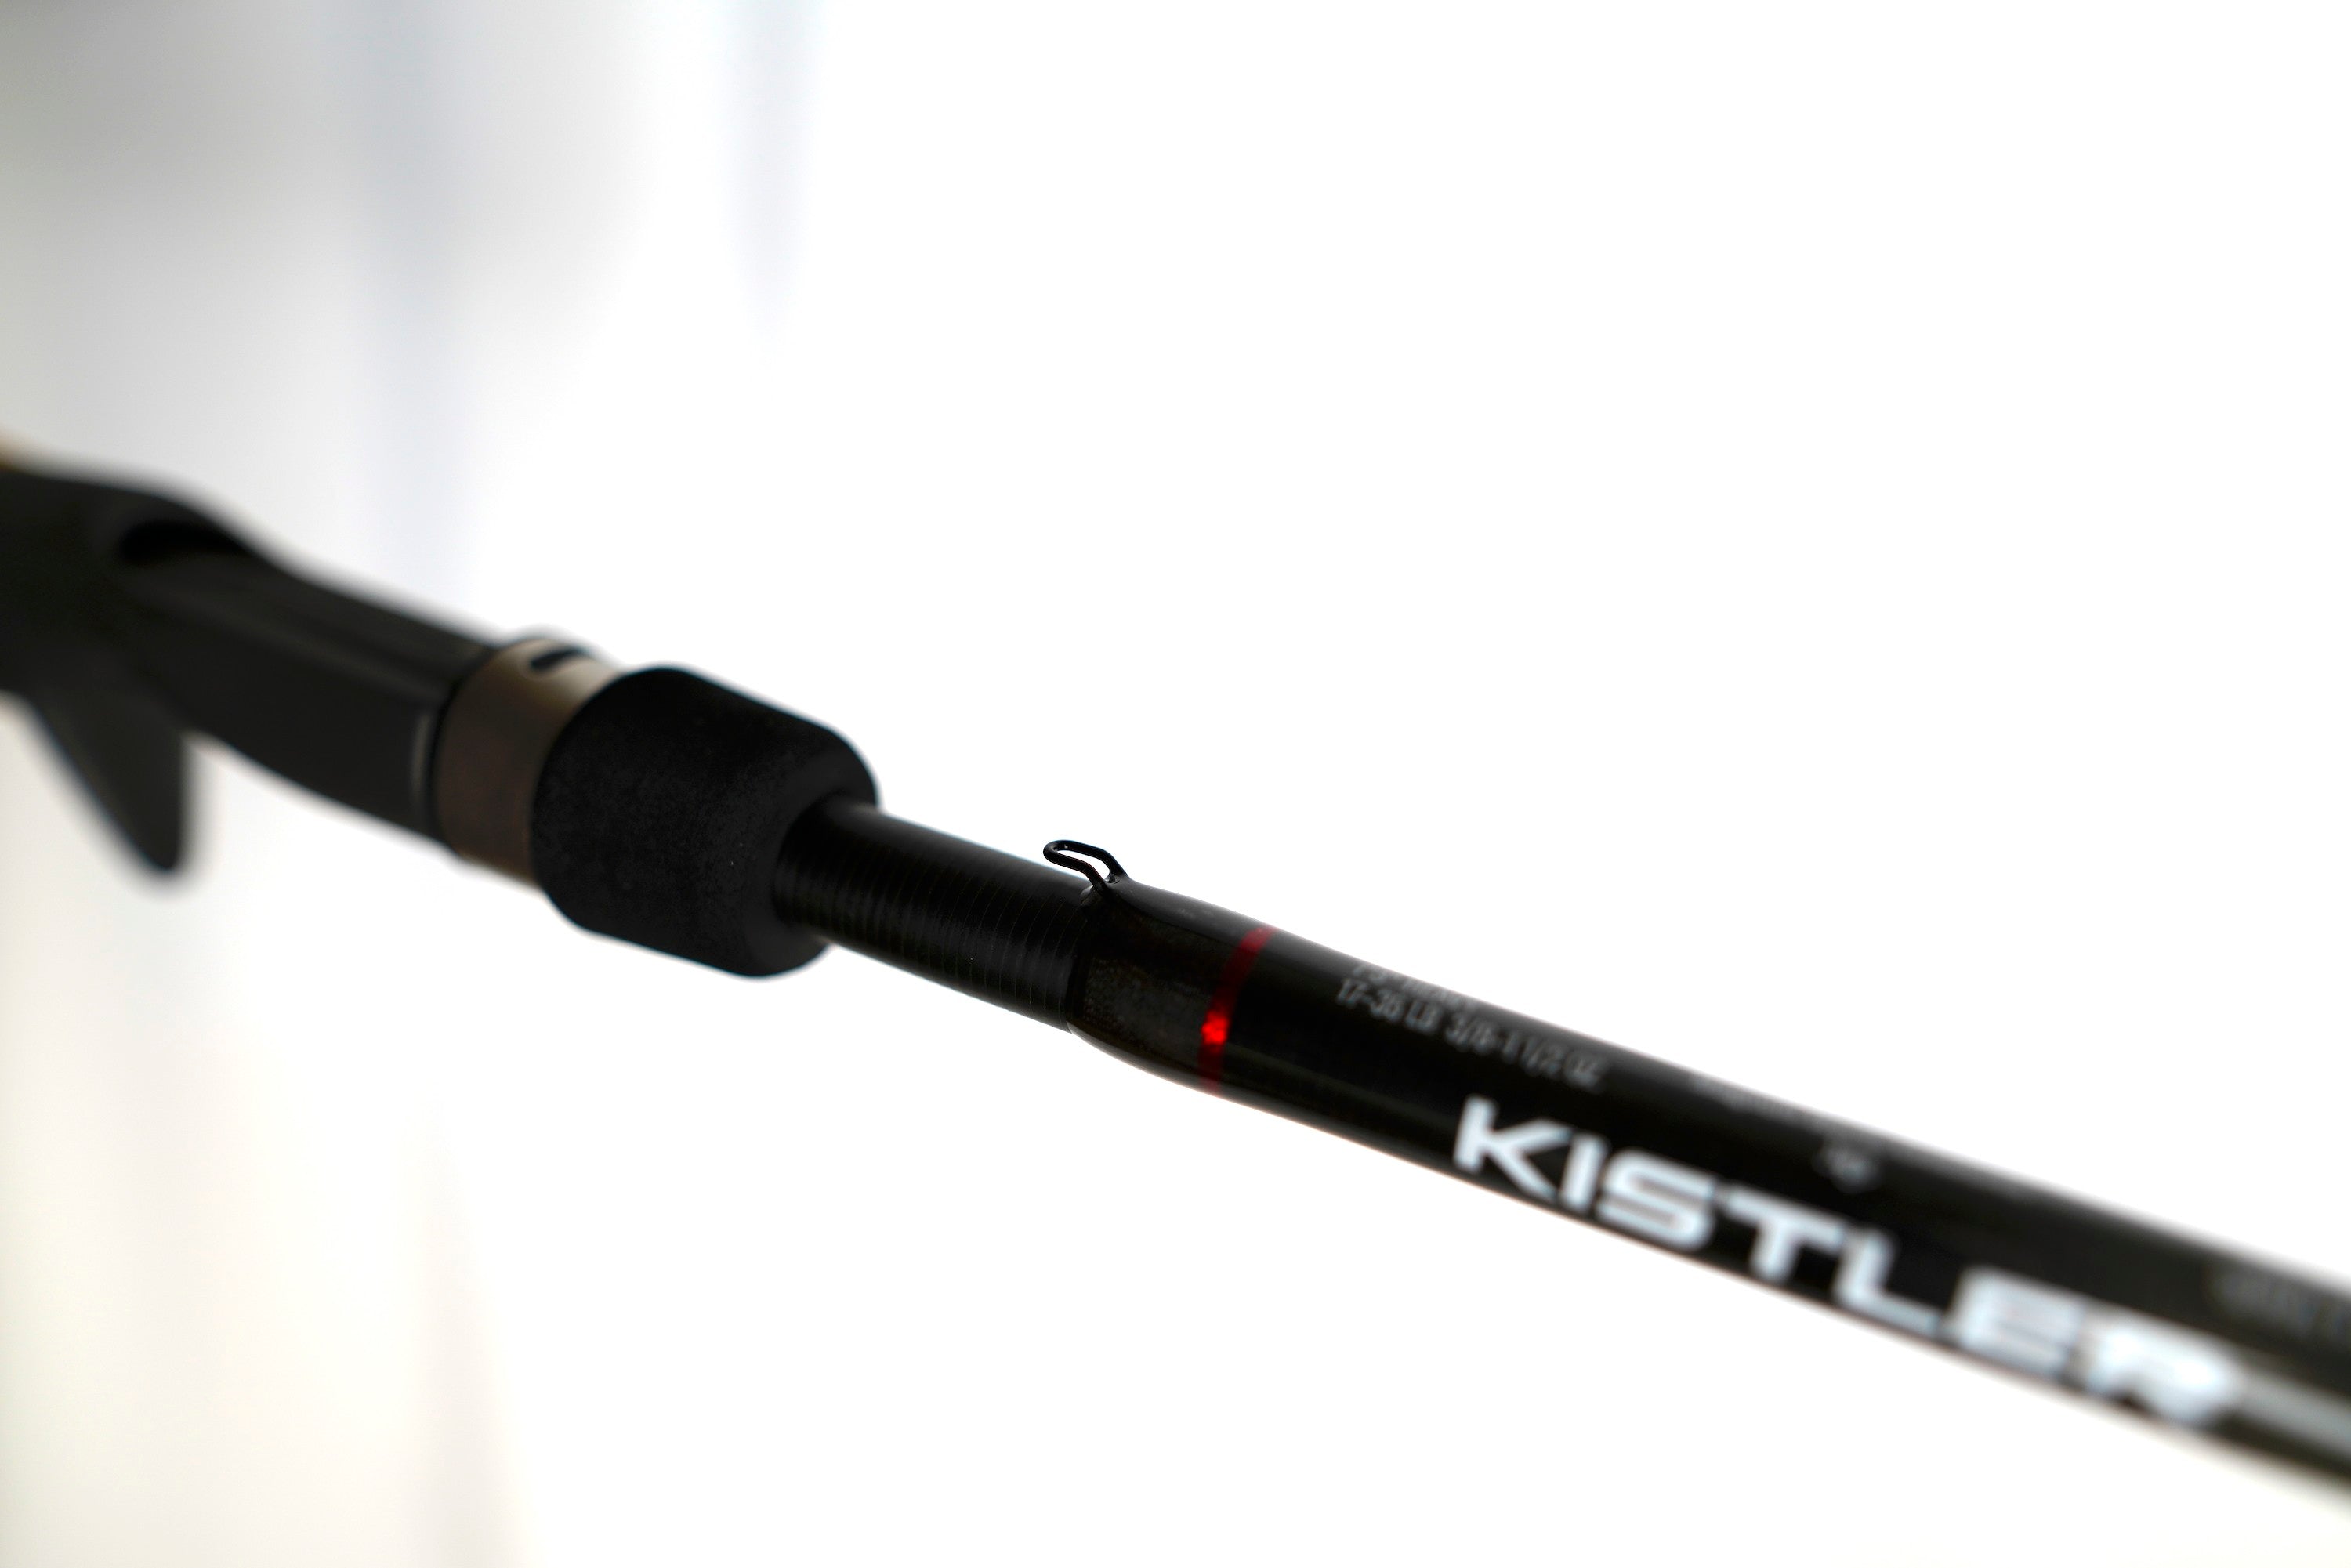 Best Dropshot Rods In 2020 – Top Reviews With Comparison! 